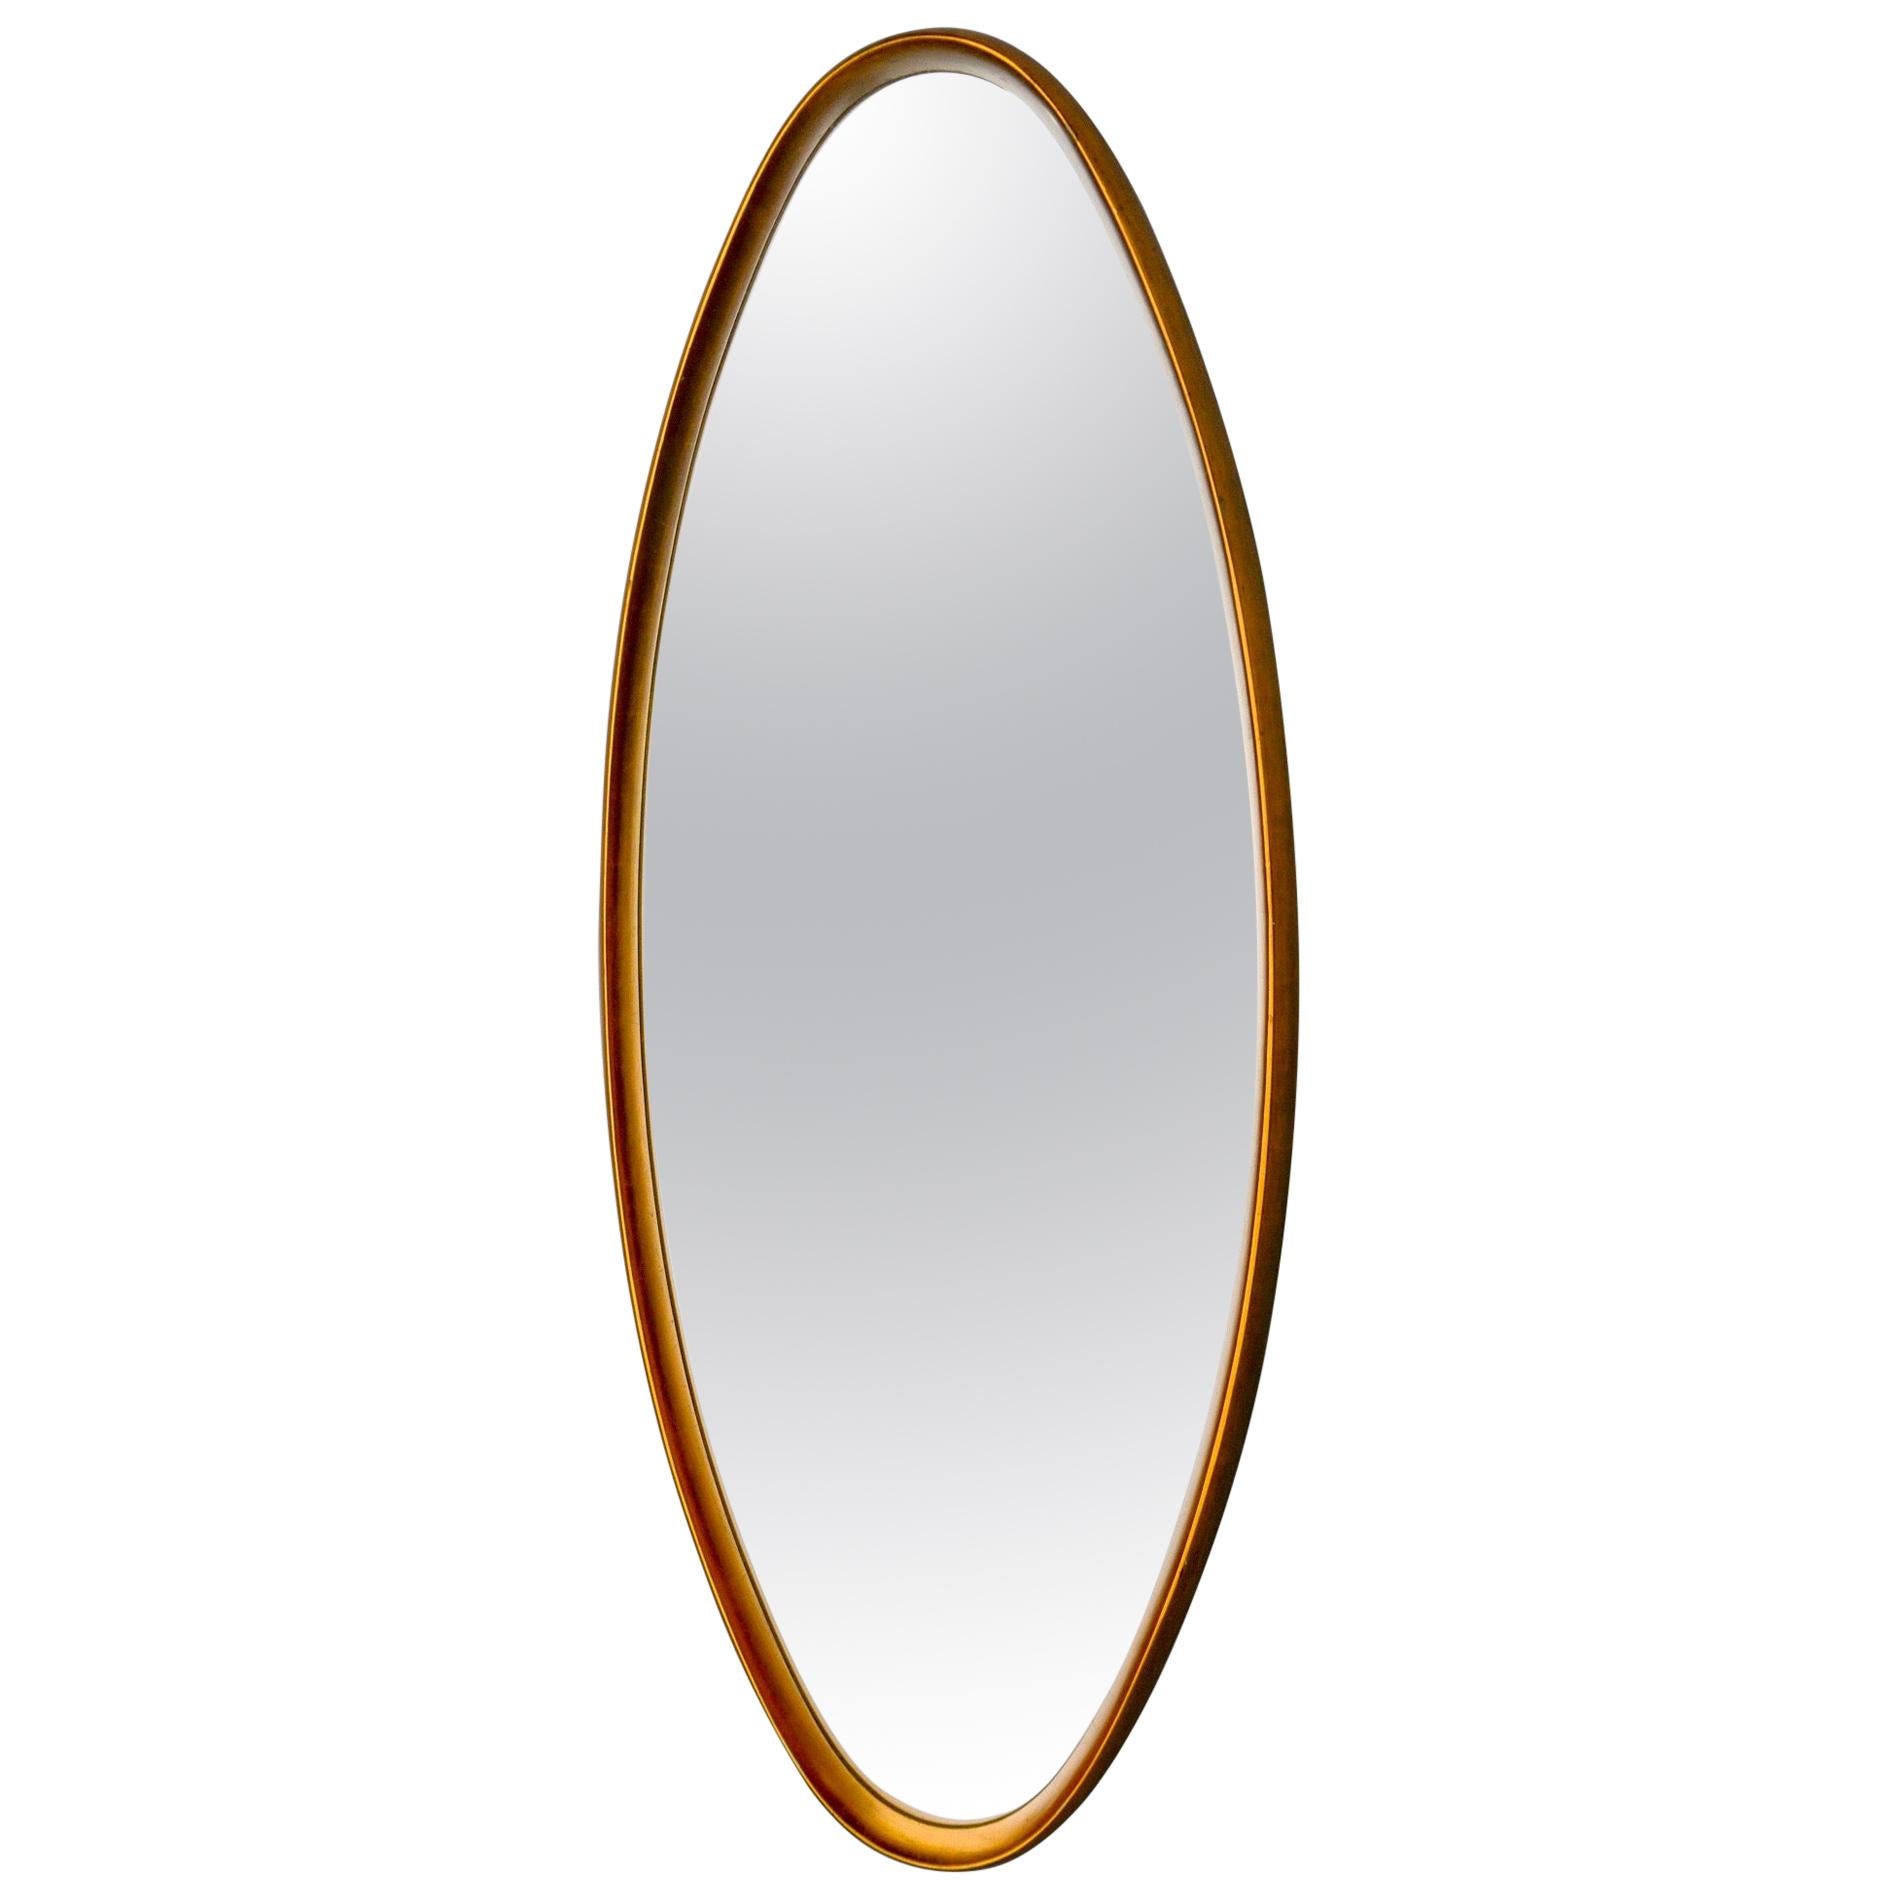 Midcentury Tall Oval Giltwood Framed Mirror